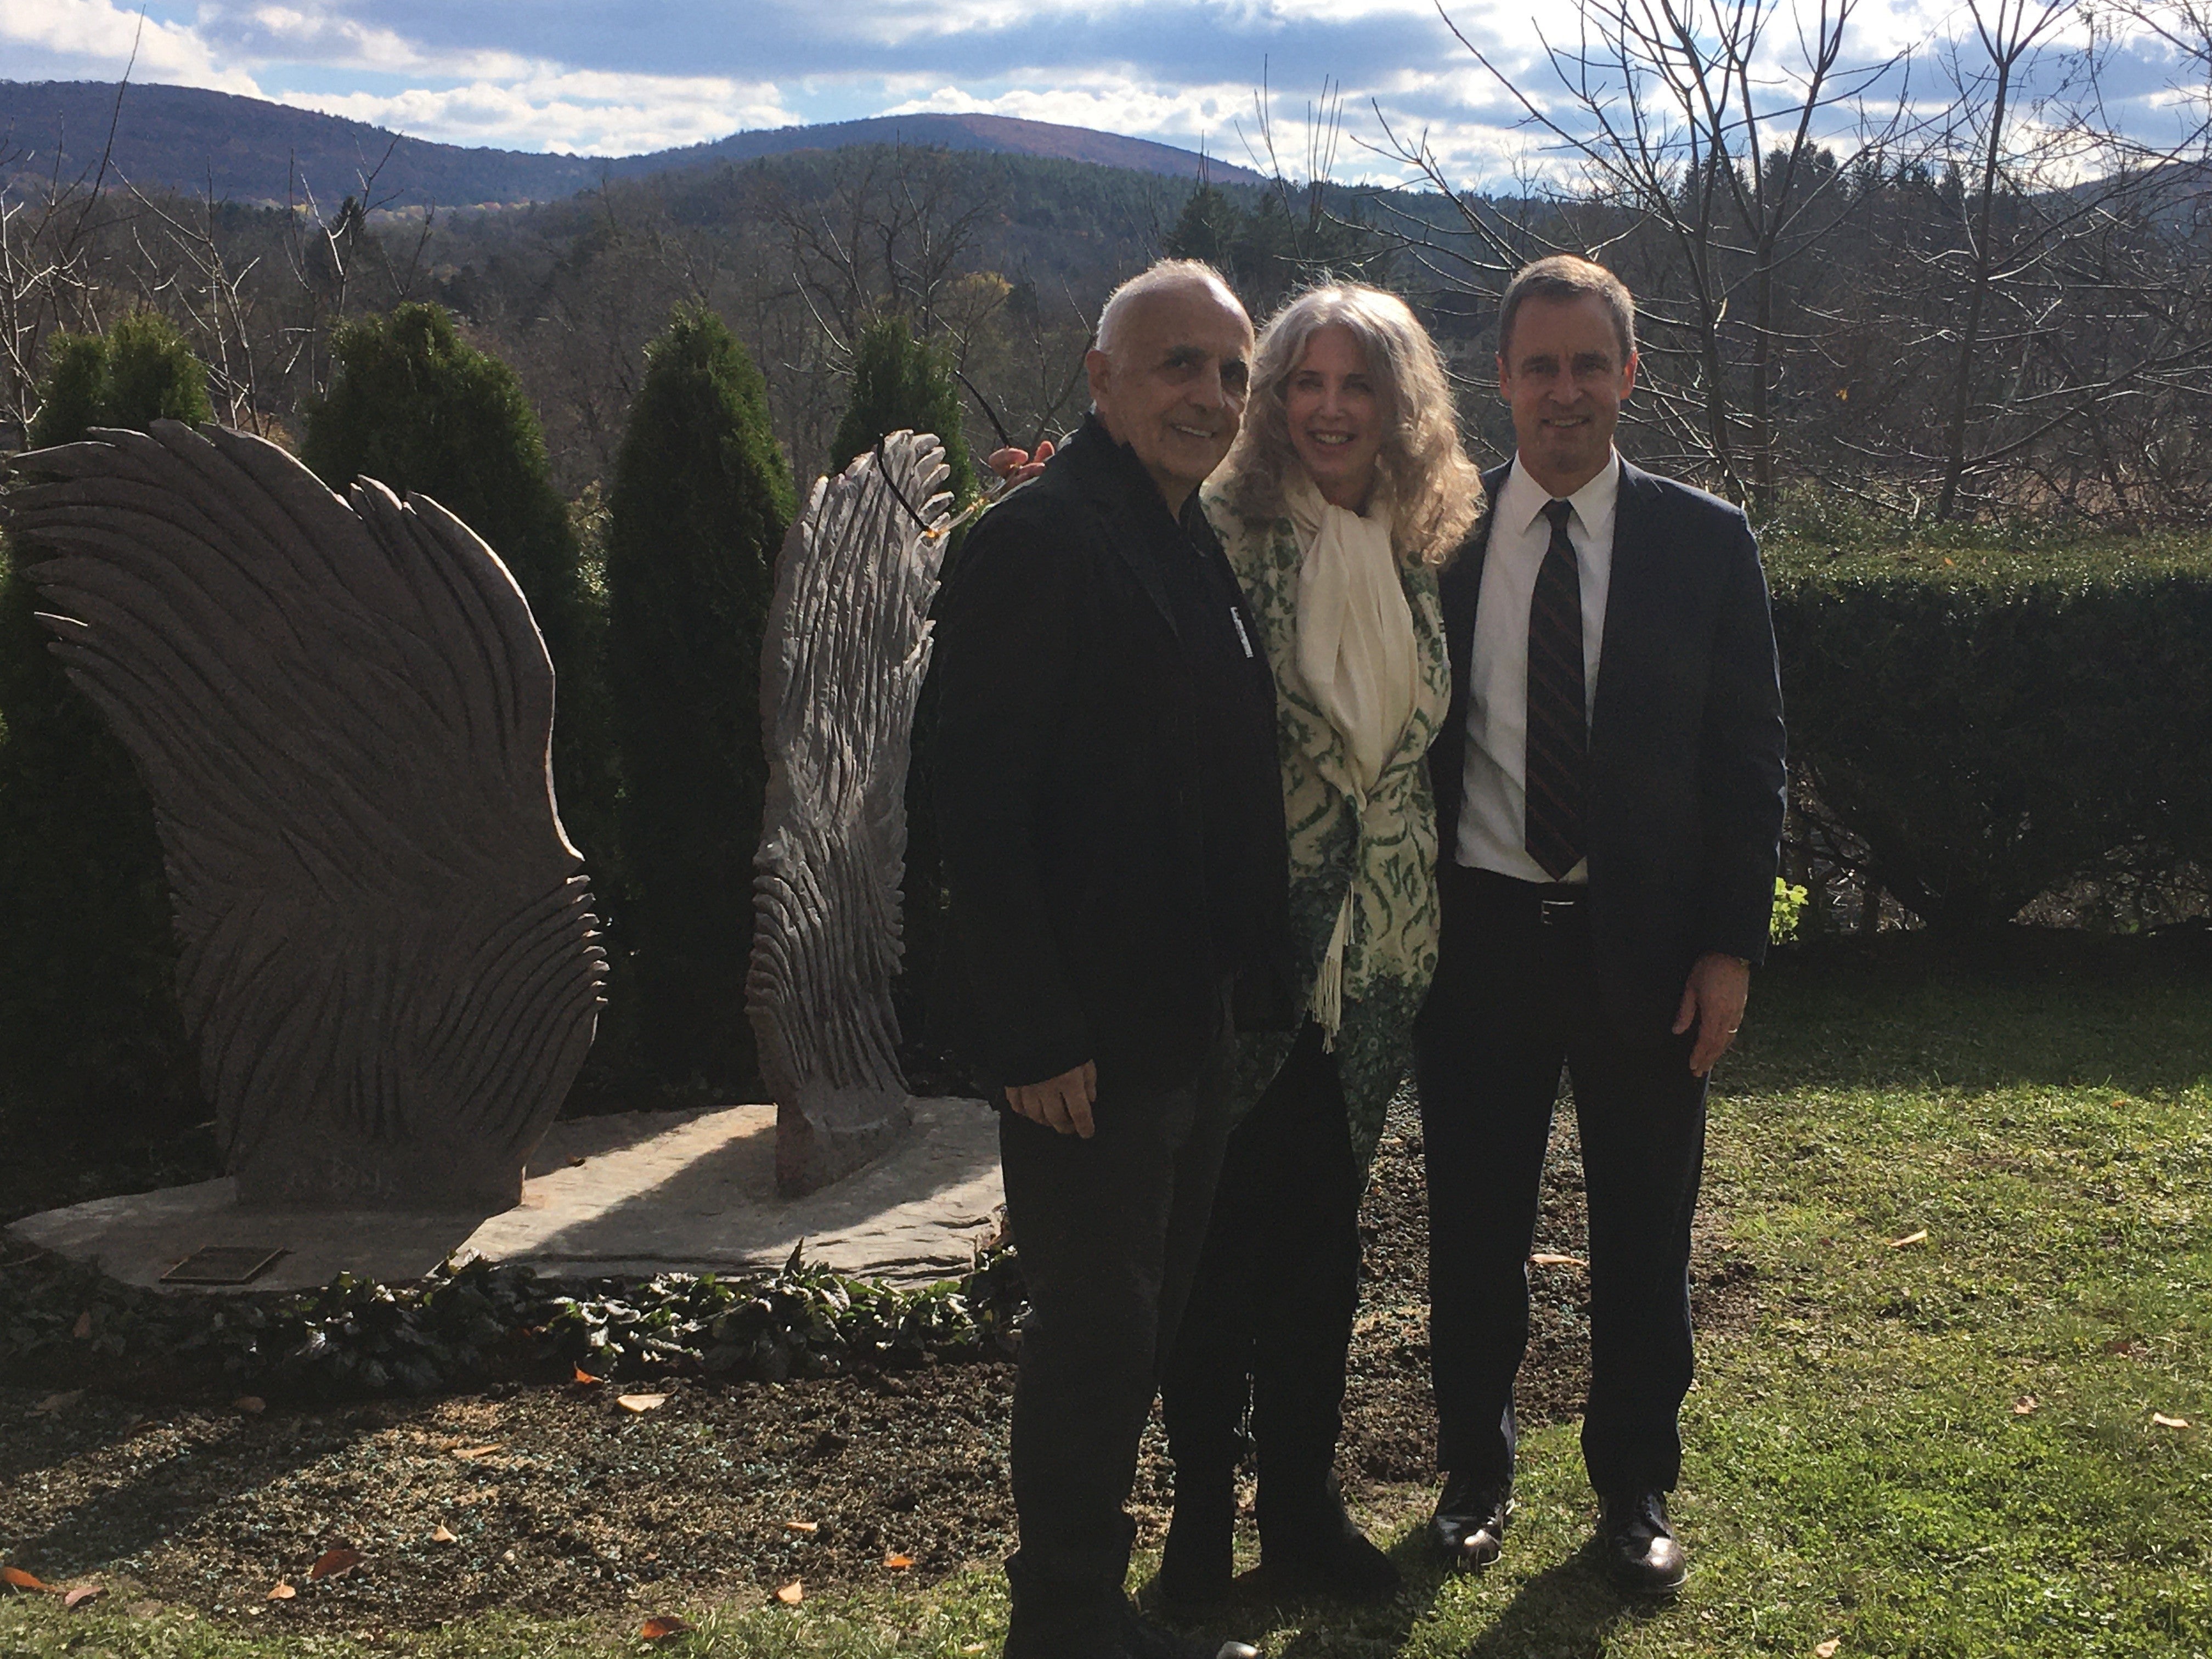 Bobby Jacobs, Elizabeth Bryan-Jacobs, and Dr. William LeCates at the sculpture event.